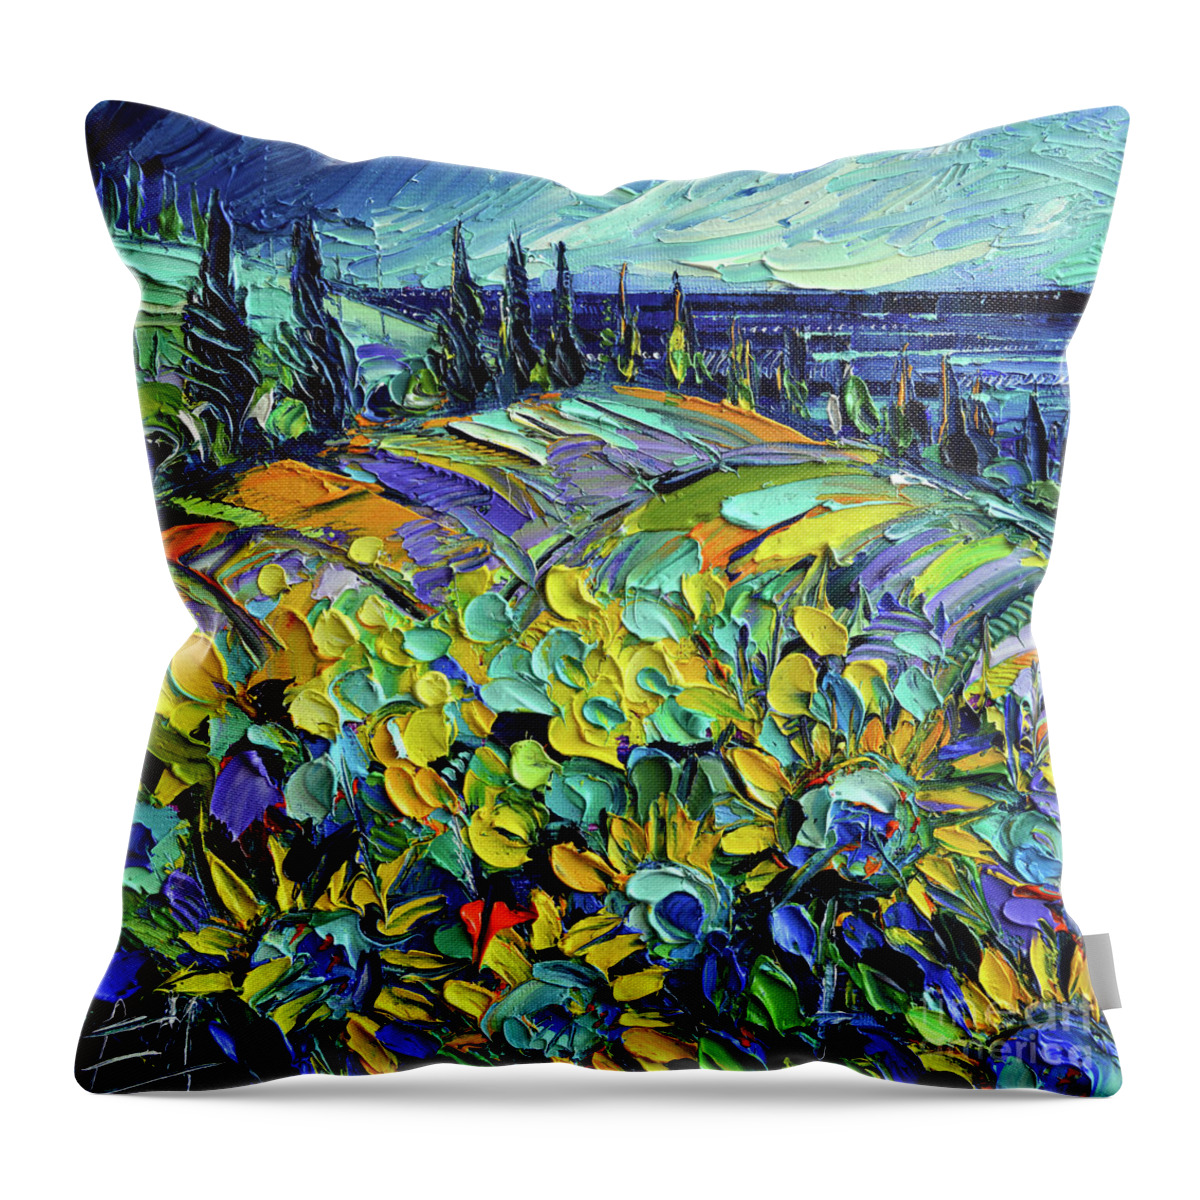 Sunflowers Field By The Sea Throw Pillow featuring the painting Sunflowers field by the sea - modern impressionist impasto palette knife oil painting by Mona Edulesco